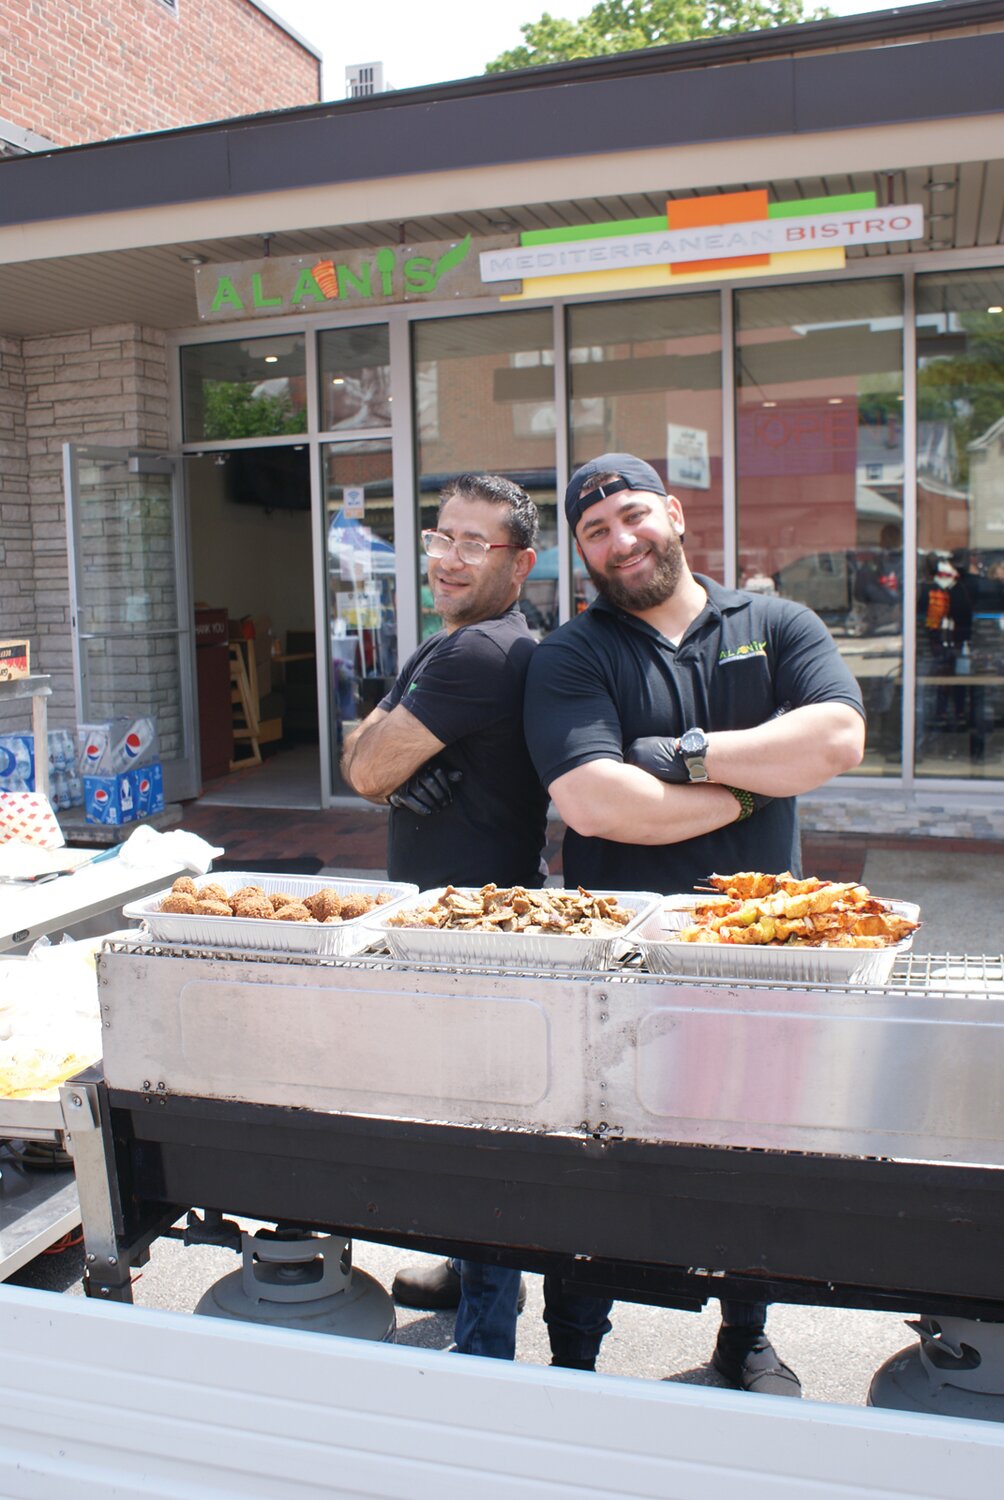 BLAST FROM THE MEDITERANIAN: Alanis mediterranean Bistro served up gyros, falafel, chicken tenders and tender steak to those stopping by during the festival. Head chef Sami Almuhtaseb (left) and Part-Owner Mohammad Alani proudly smiled and dished out delicious flavors.